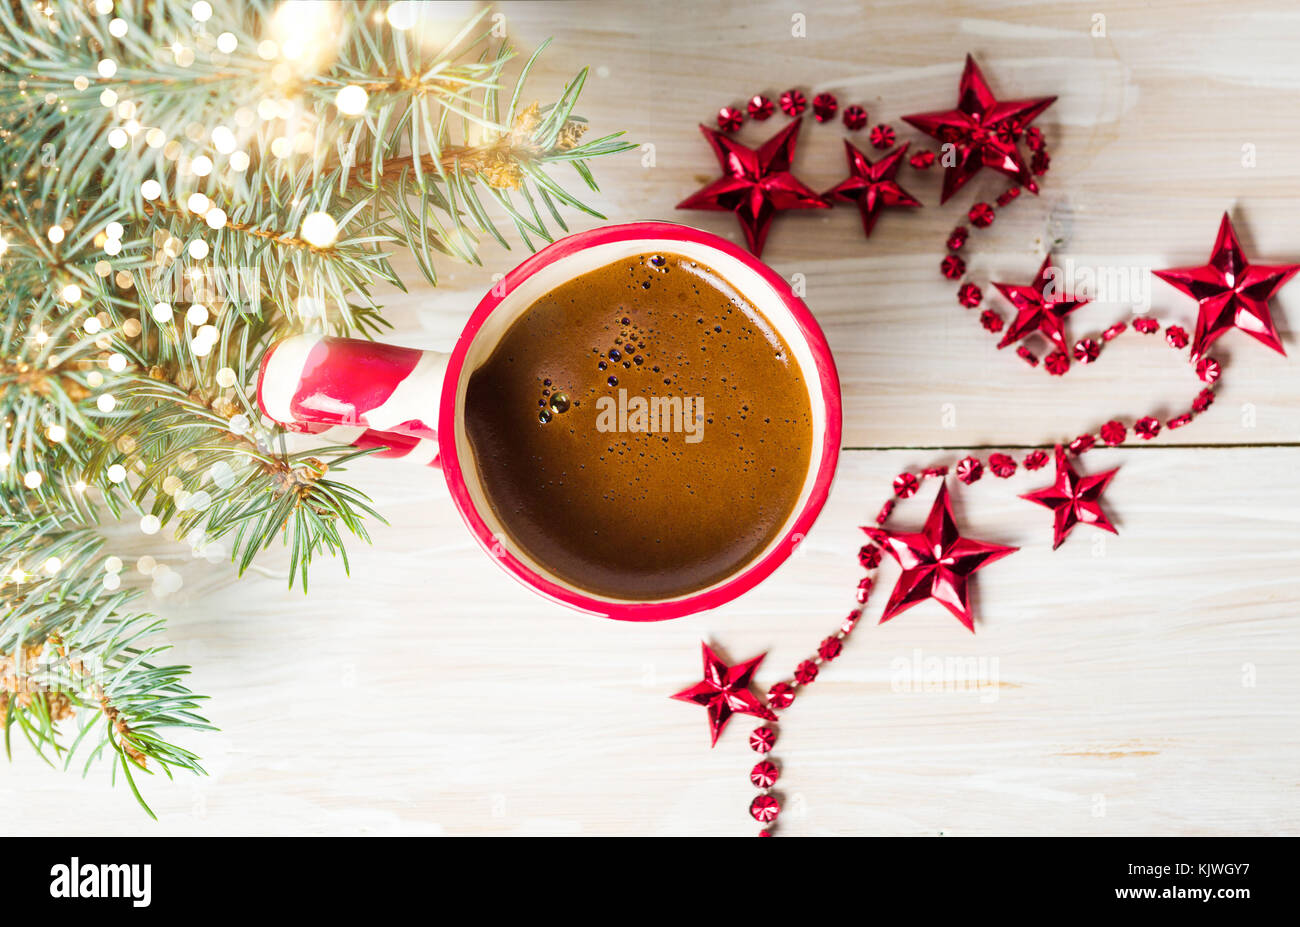 Cup of coffee with festive decorations on the table Stock Photo